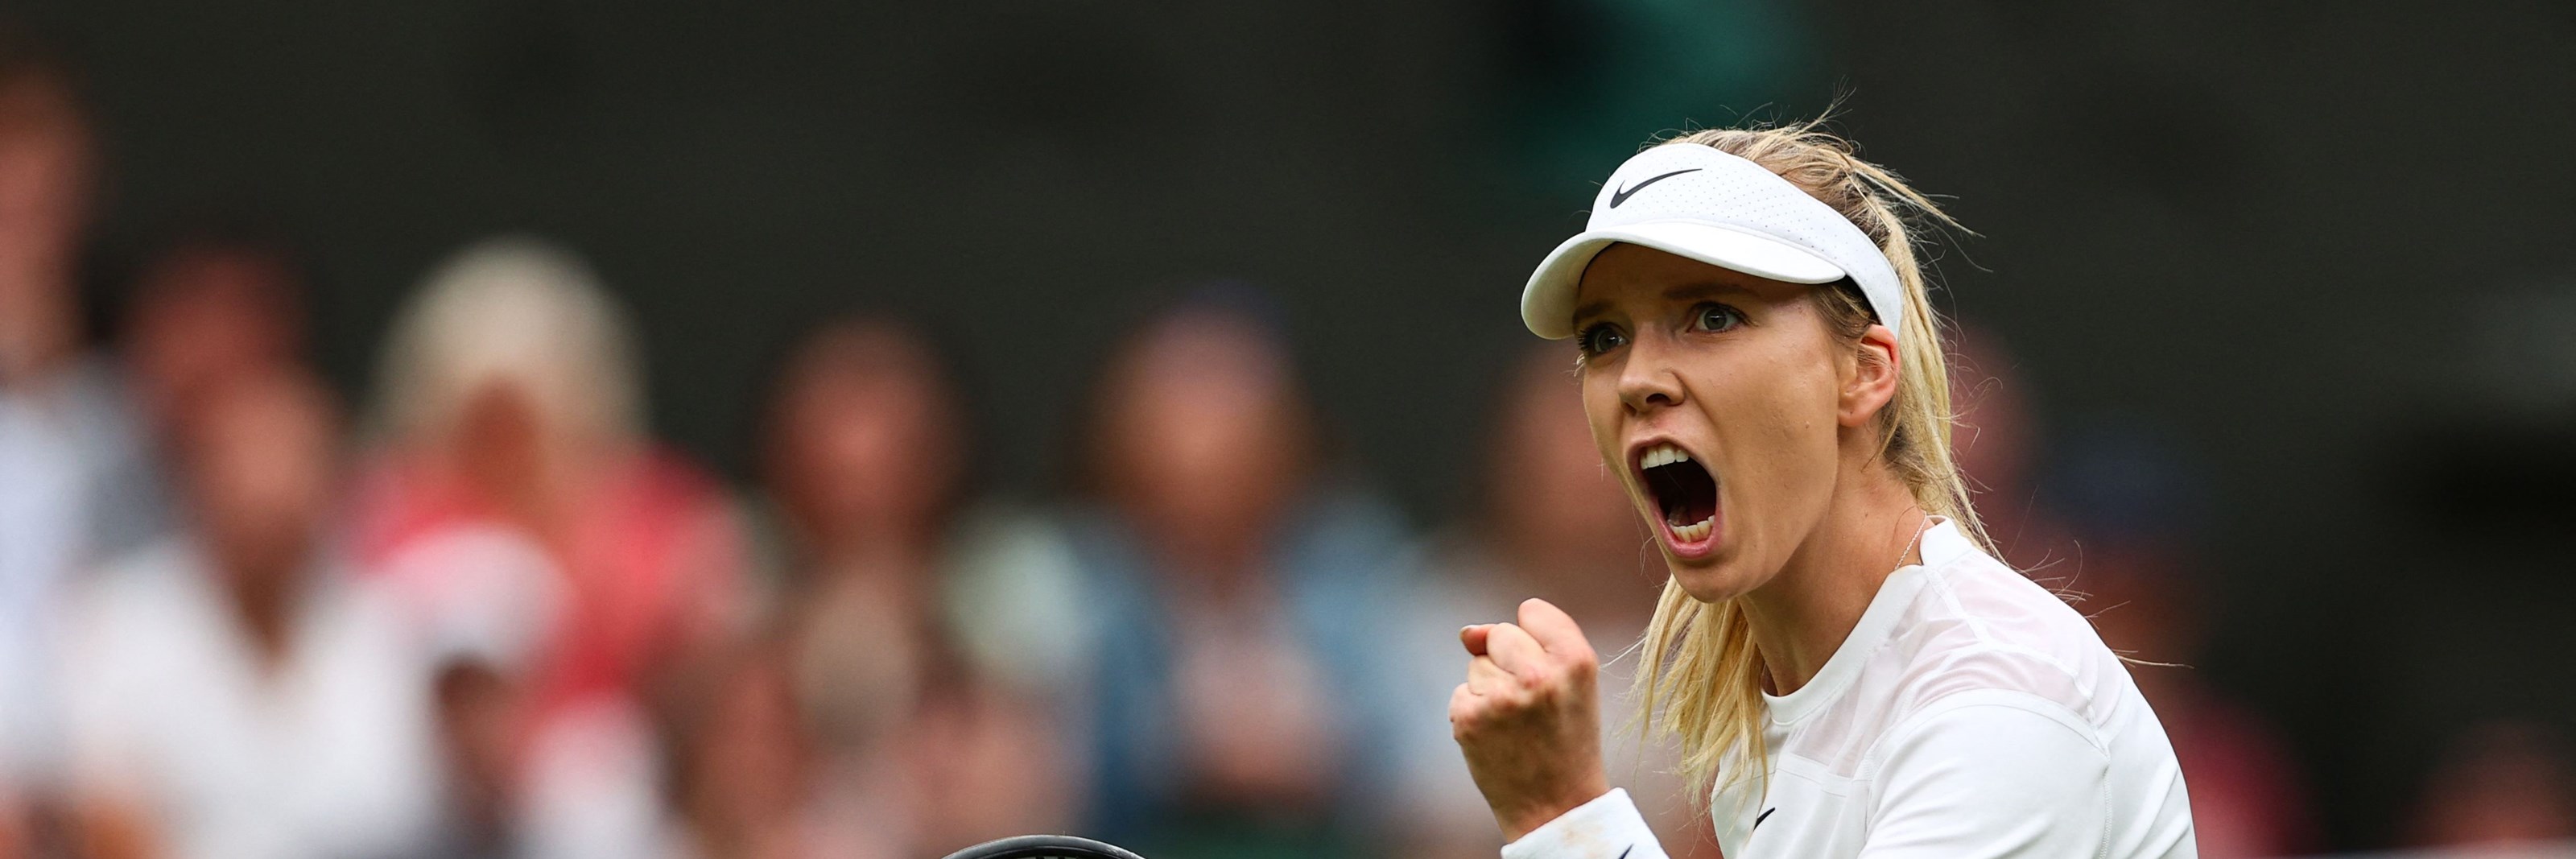 Katie Boulter fist pumps in the second round of Wimbledon